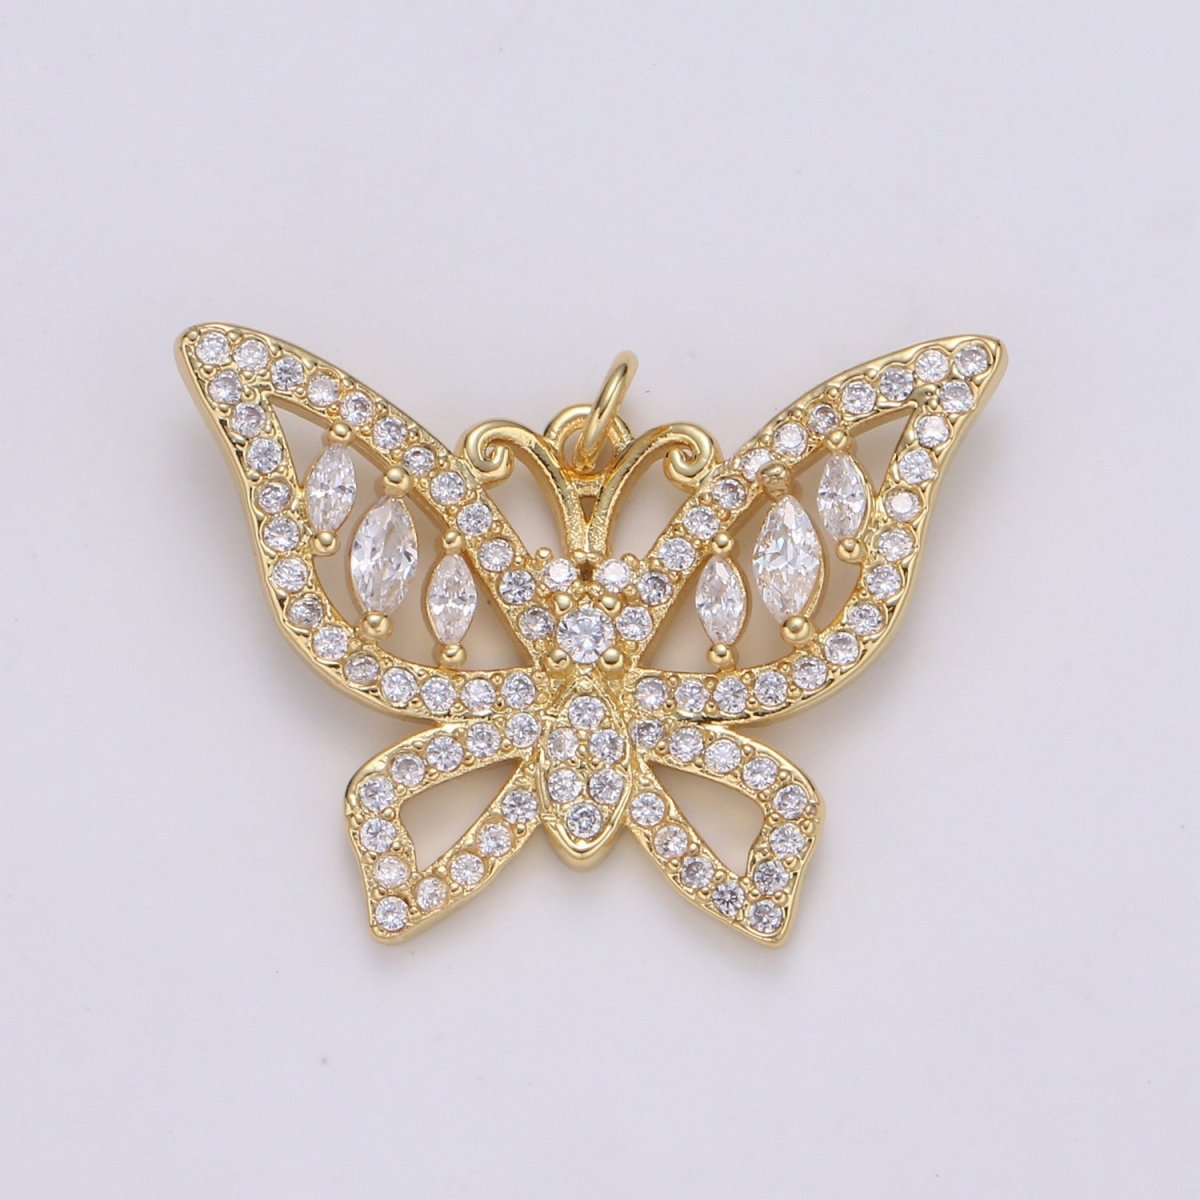 24k Gold Filled Charm Dainty Micro Pave Butterfly Charm Gold Animal Jewelry Inspired Cubic Mariposa Butterfly pendant for Necklace Bracelet E-134 - DLUXCA